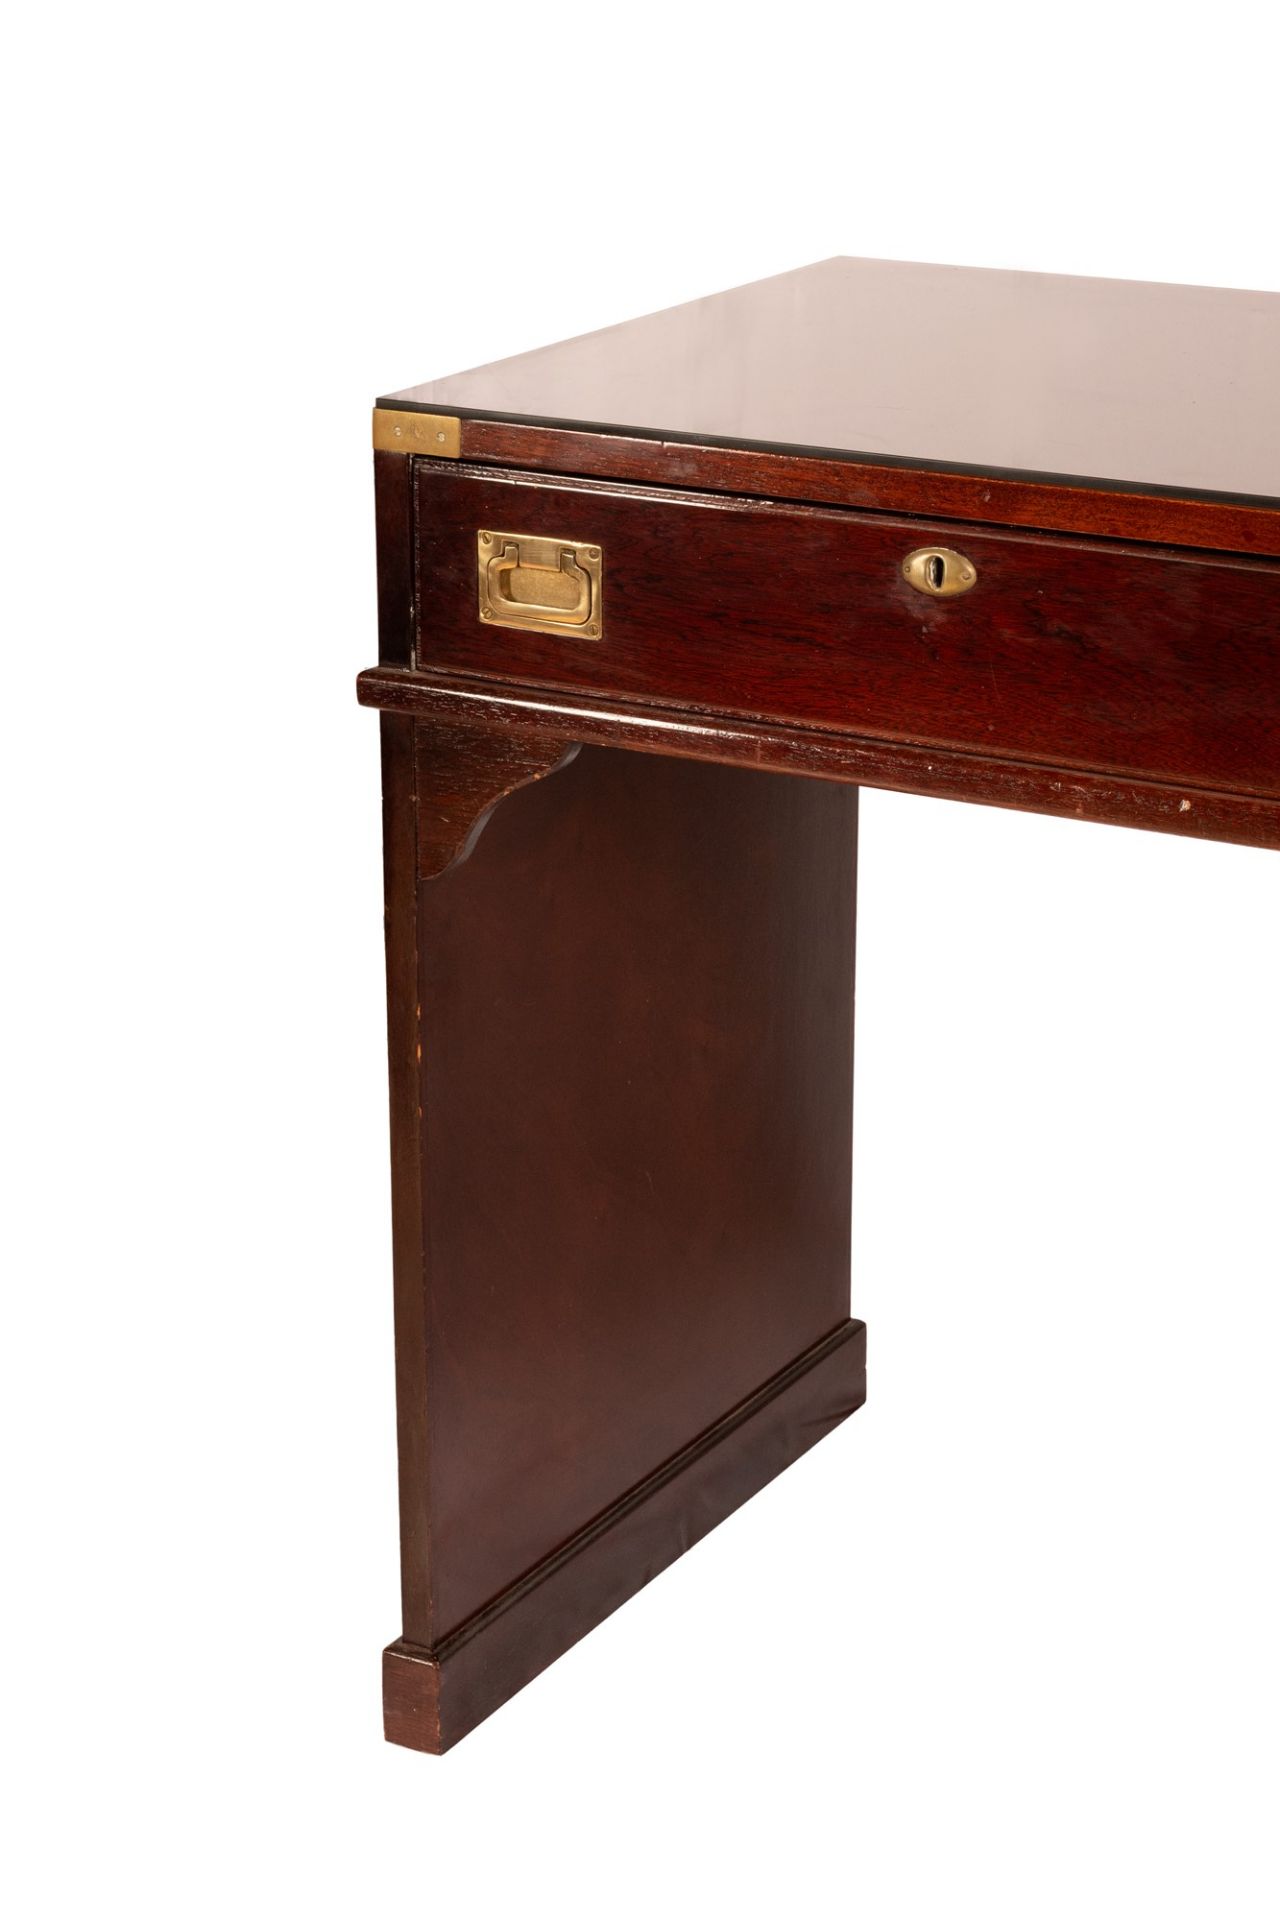 Byron marine style mahogany desk with five drawers on the front and glass top - Bild 10 aus 19